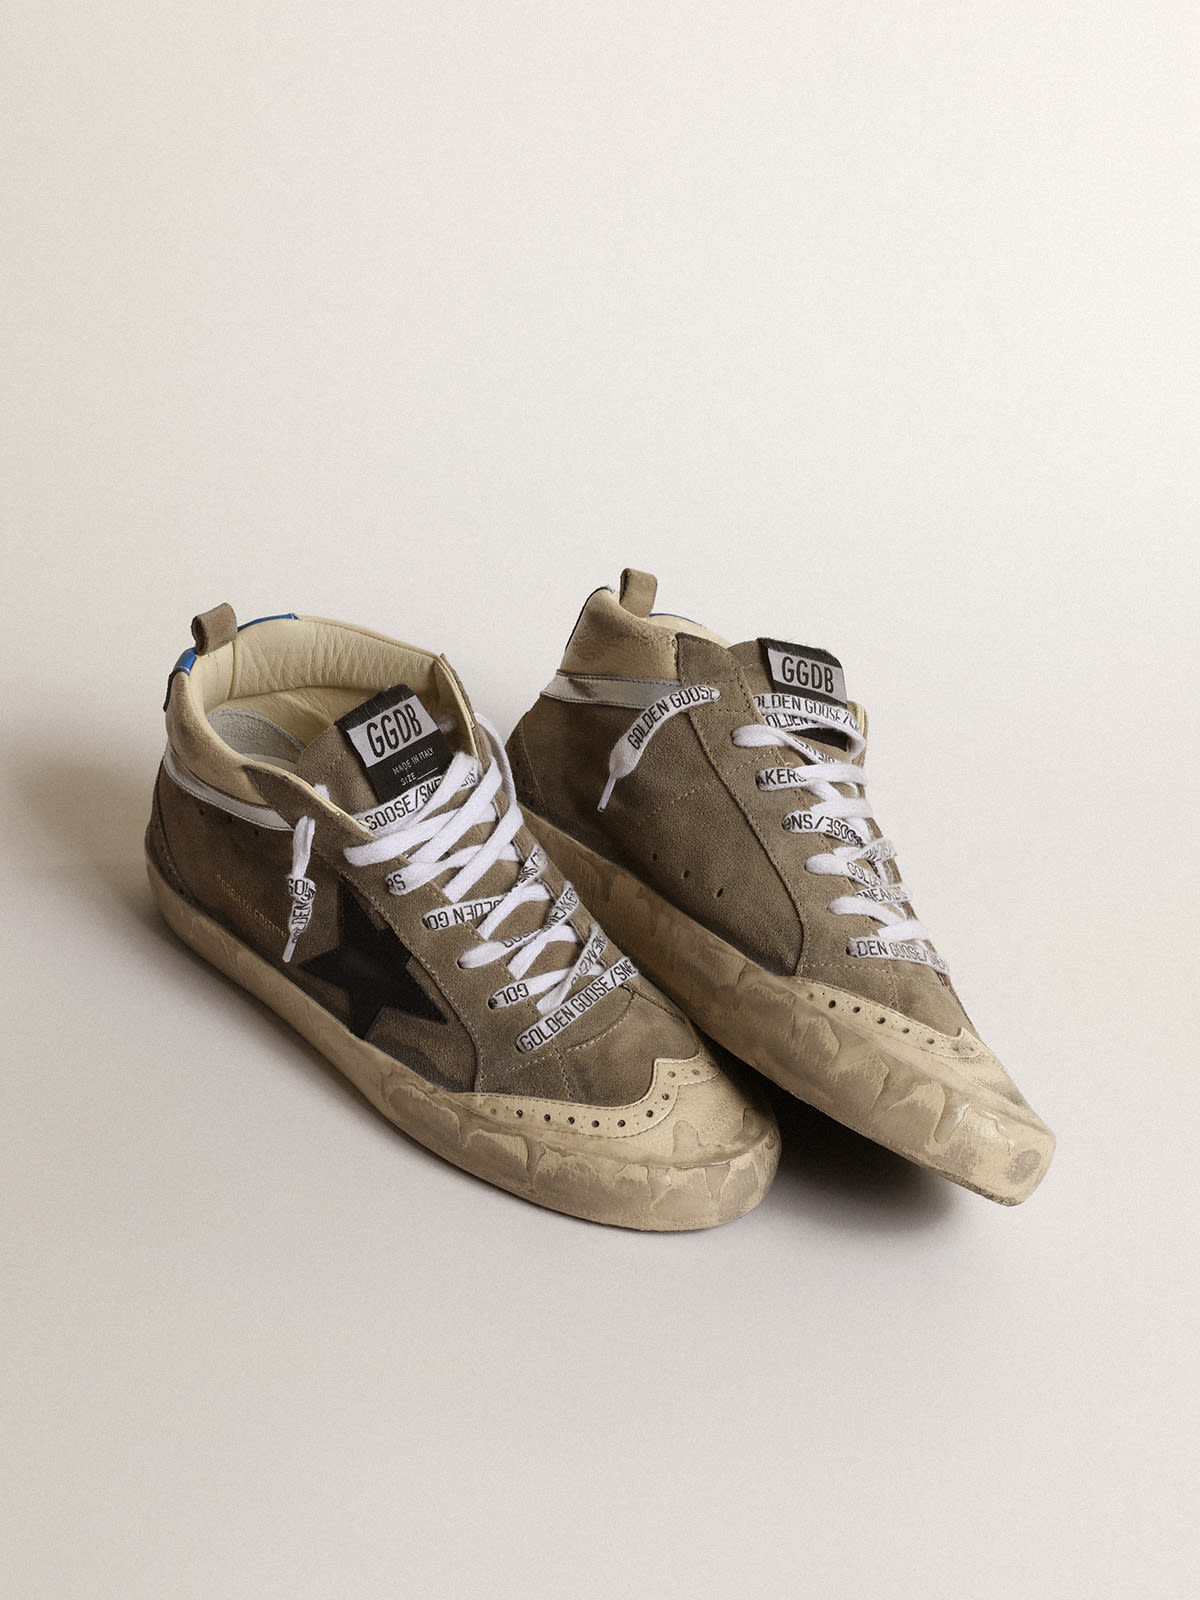 Golden Goose - Men’s Mid Star LAB in ice-gray suede with black star in 